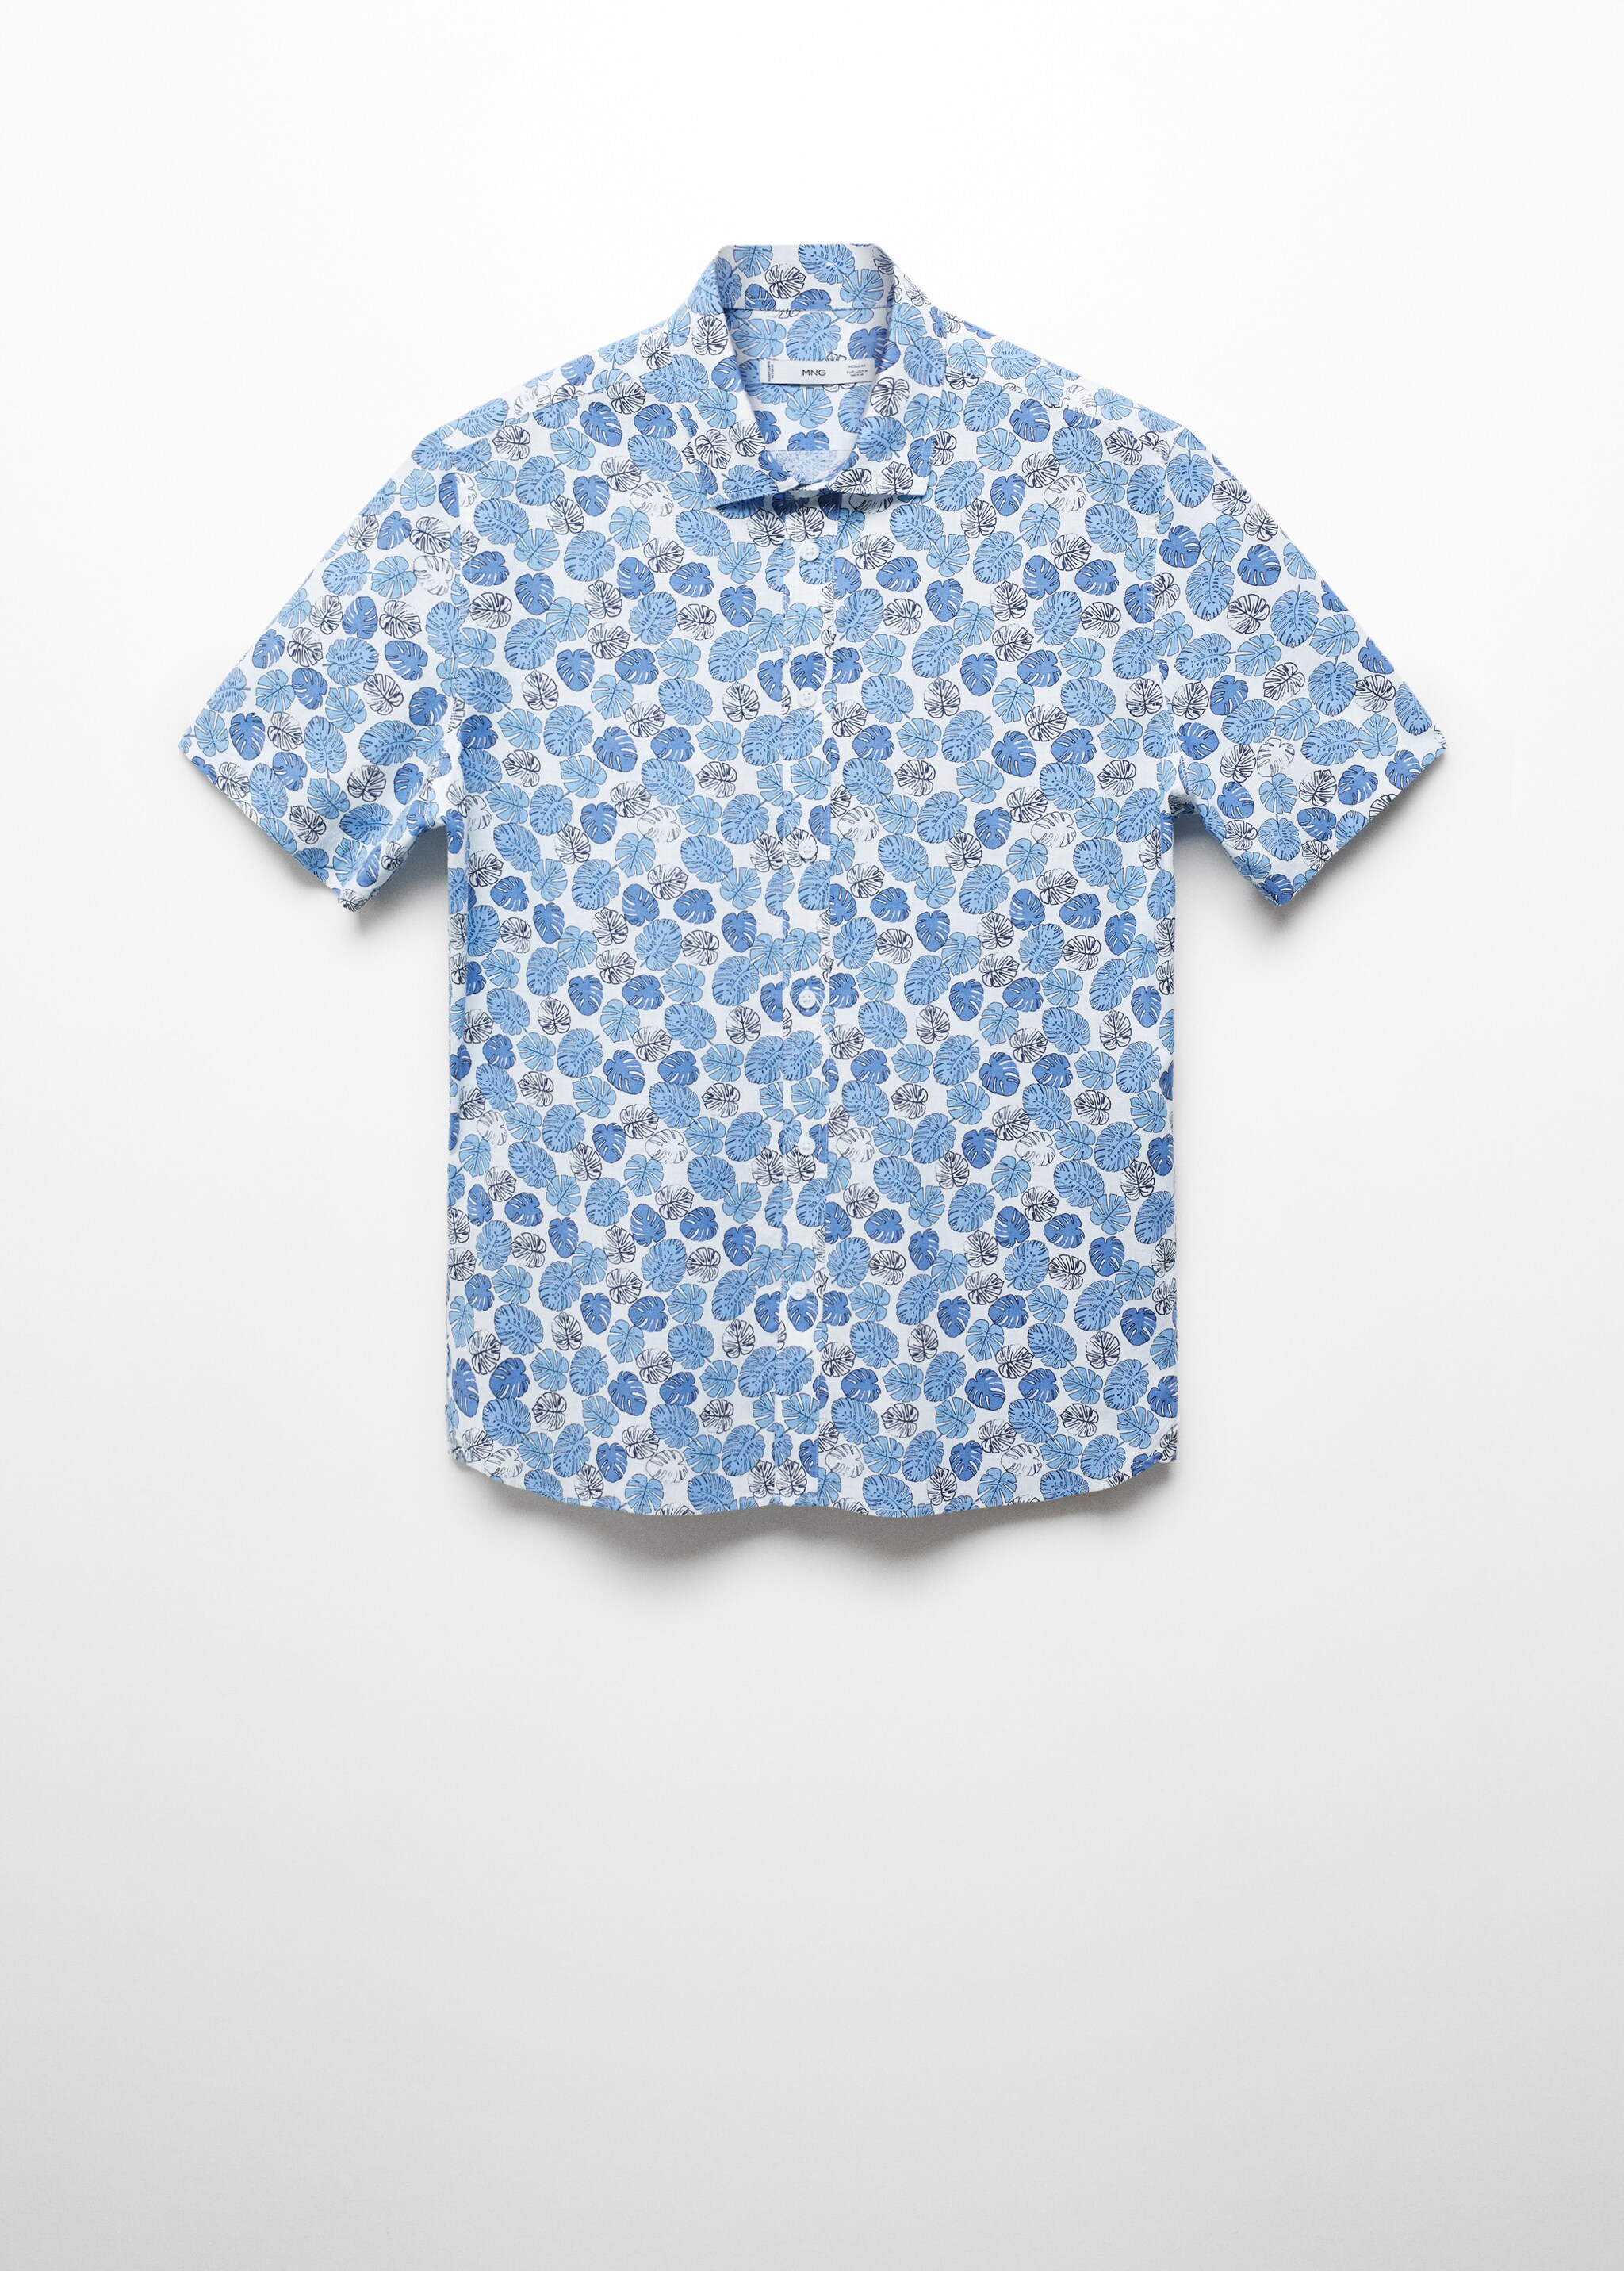 100% cotton short-sleeved printed shirt - Article without model